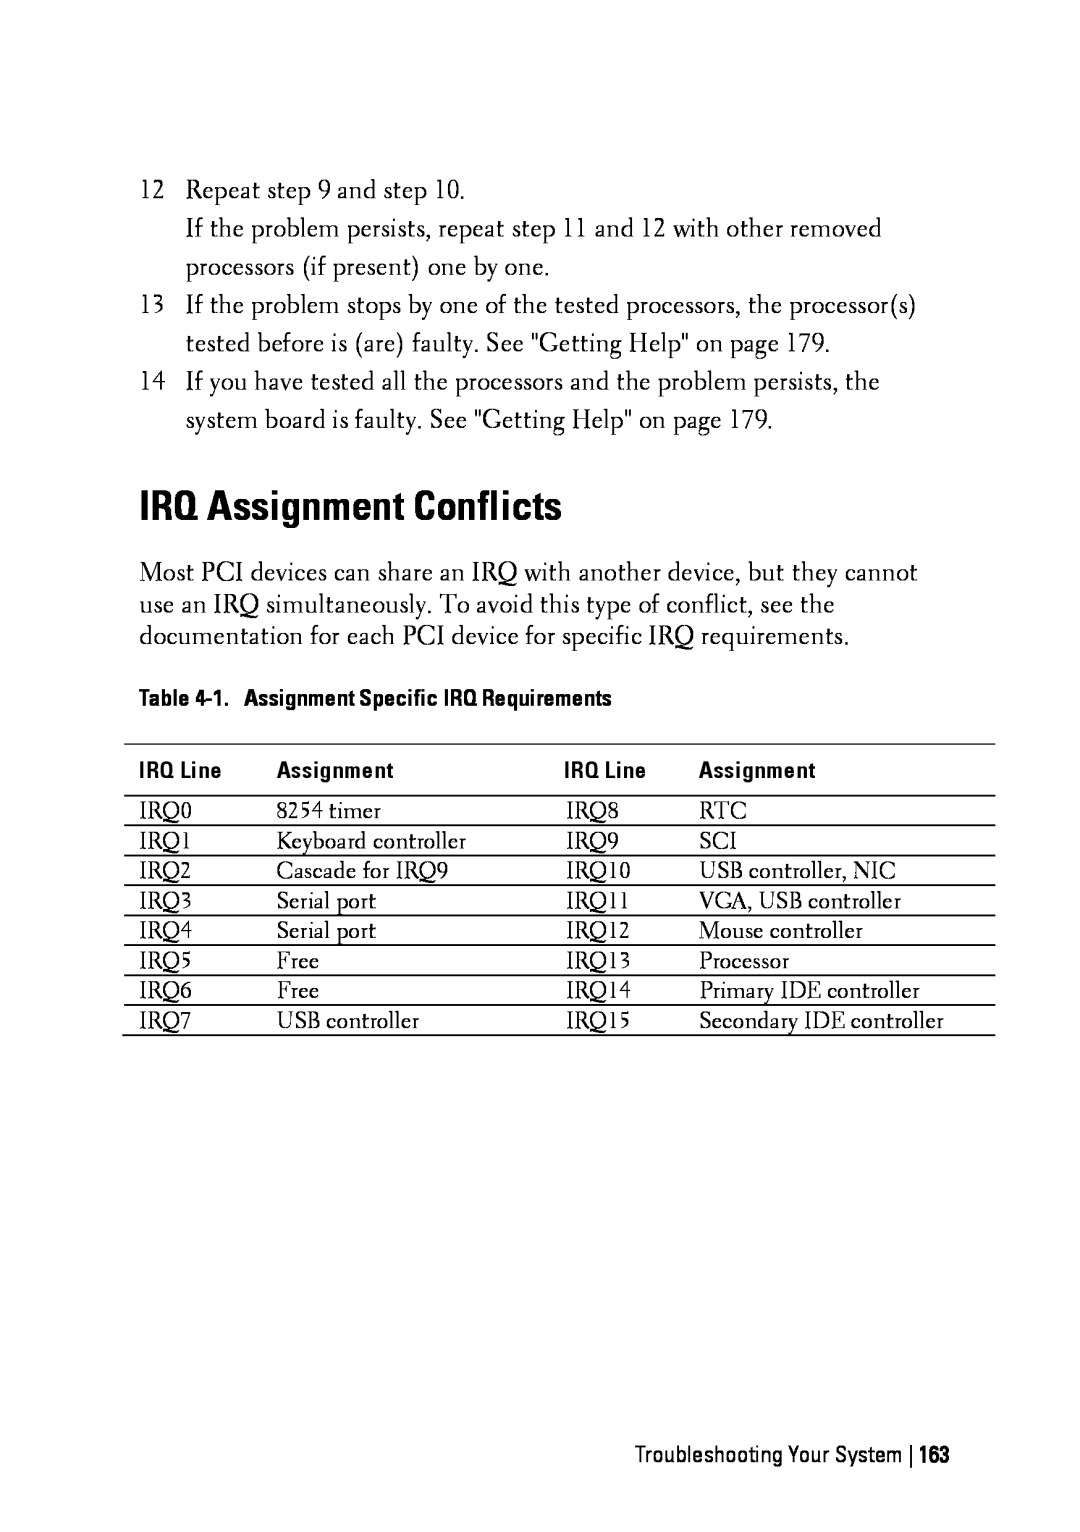 Dell C6145 manual IRQ Assignment Conflicts 